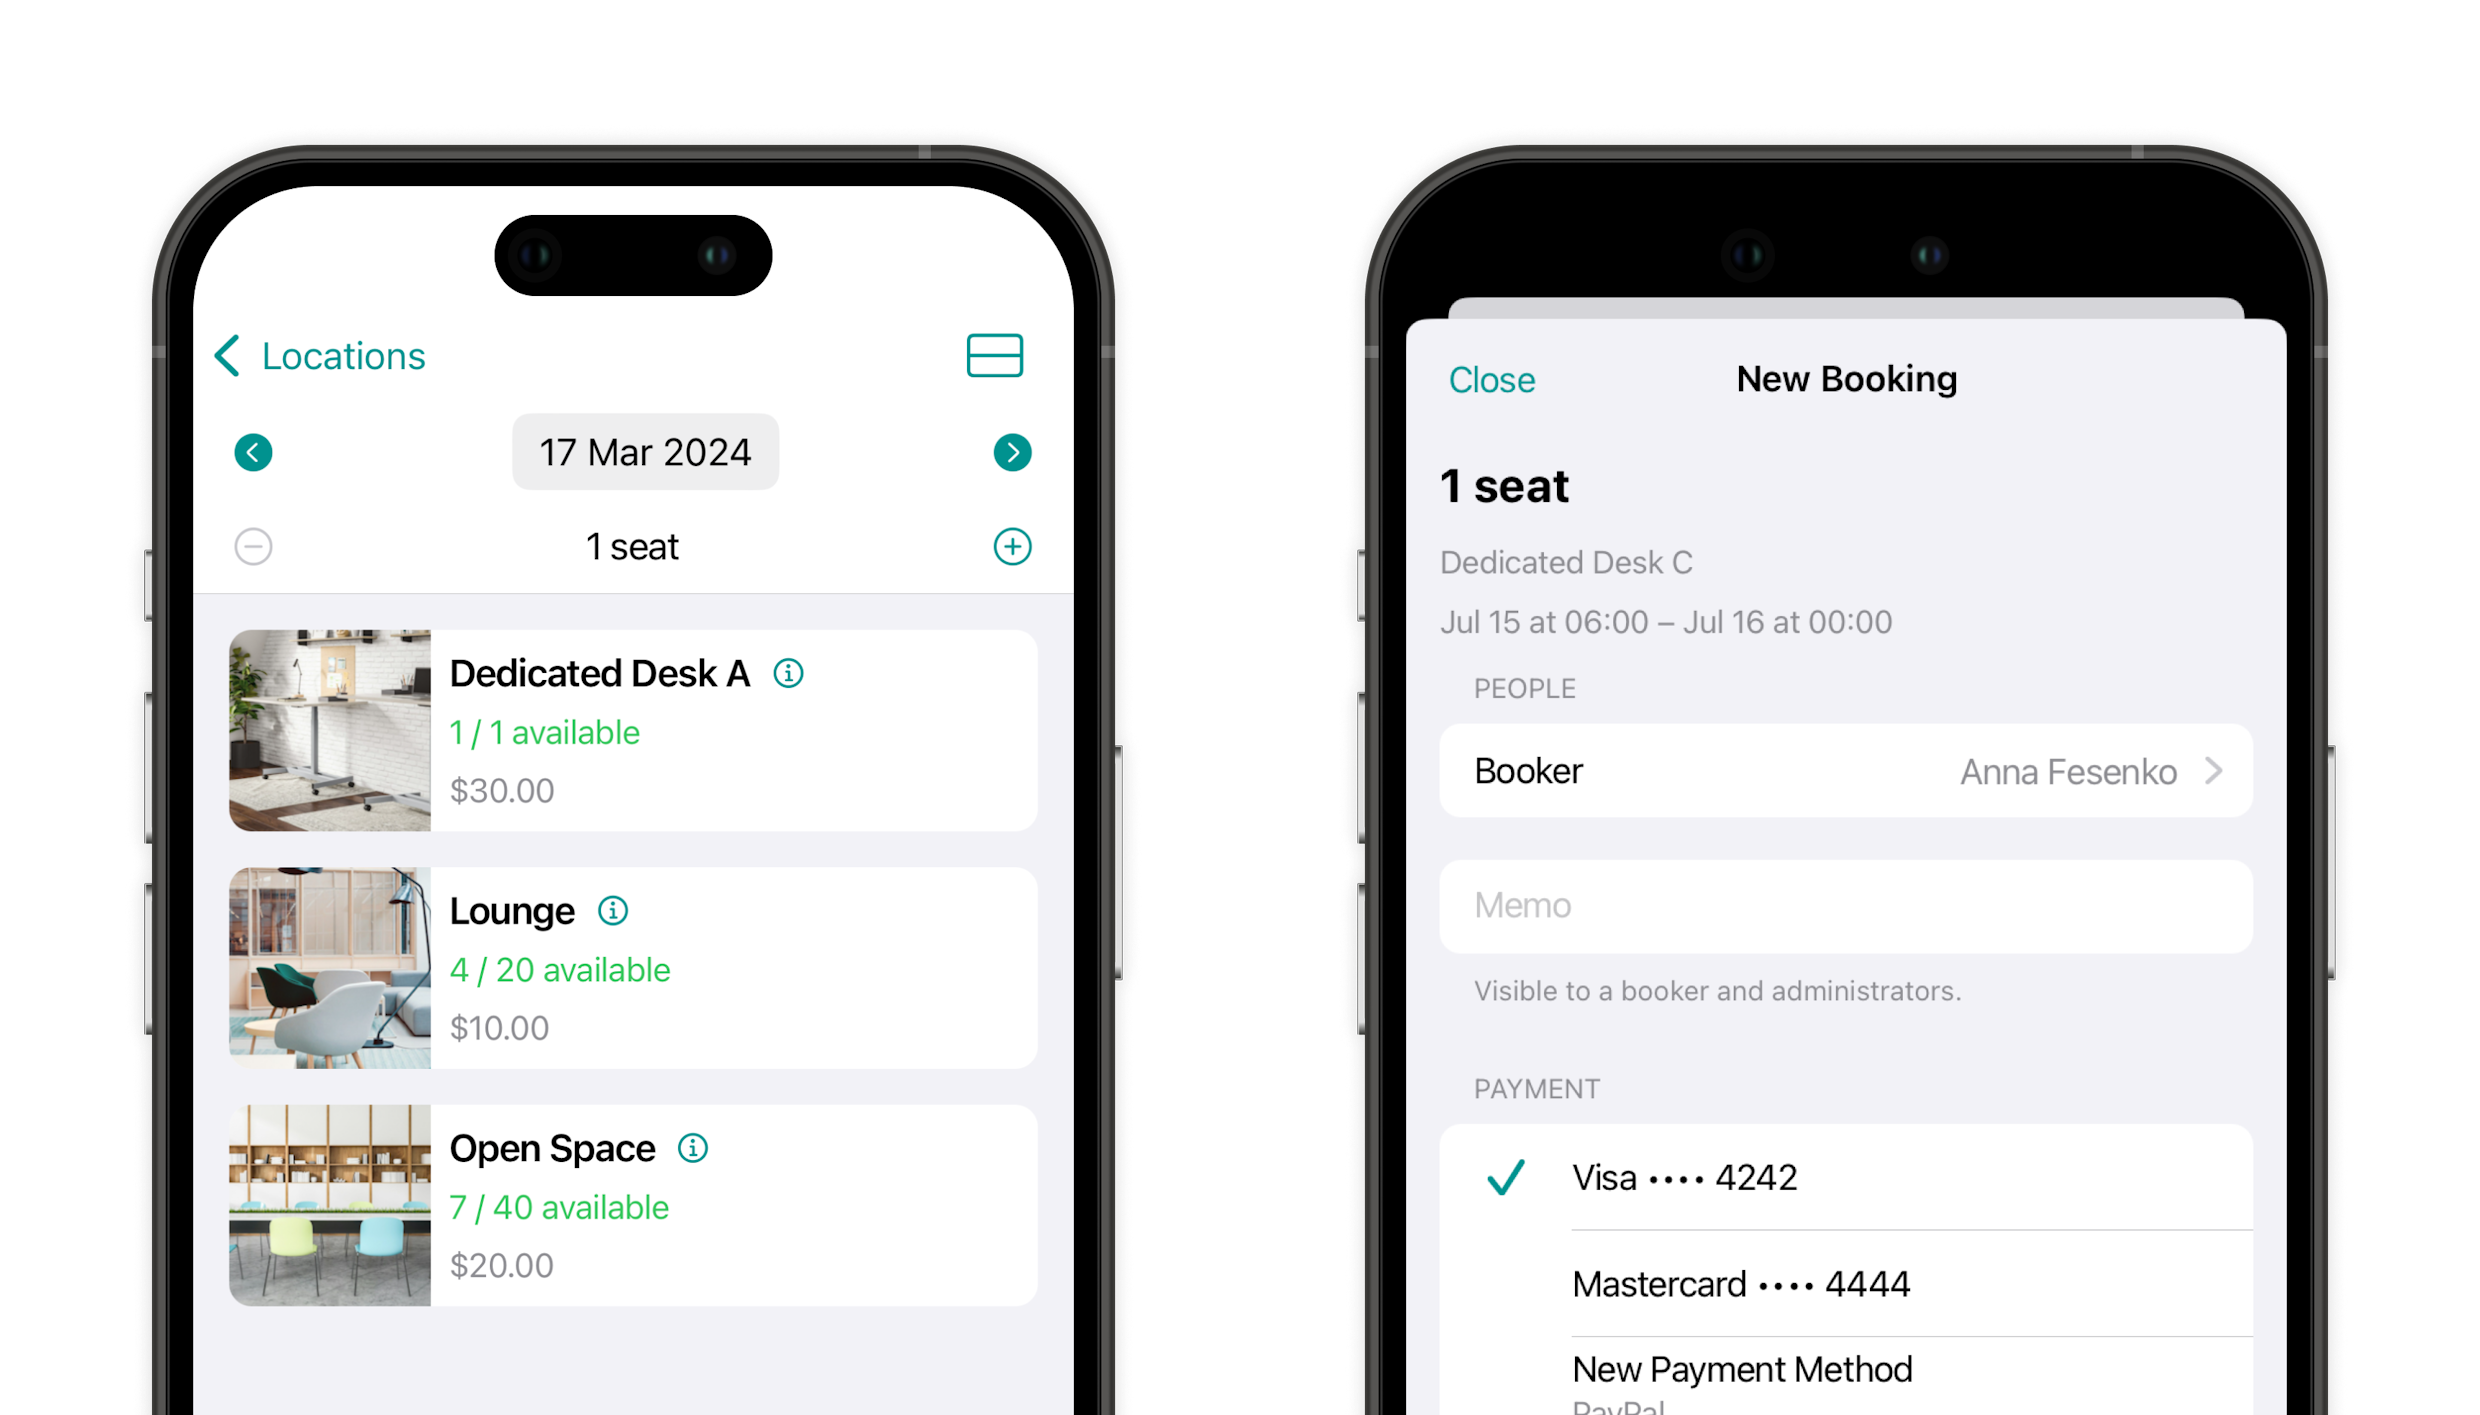 Desk booking system for coworking spaces on Spacebring app